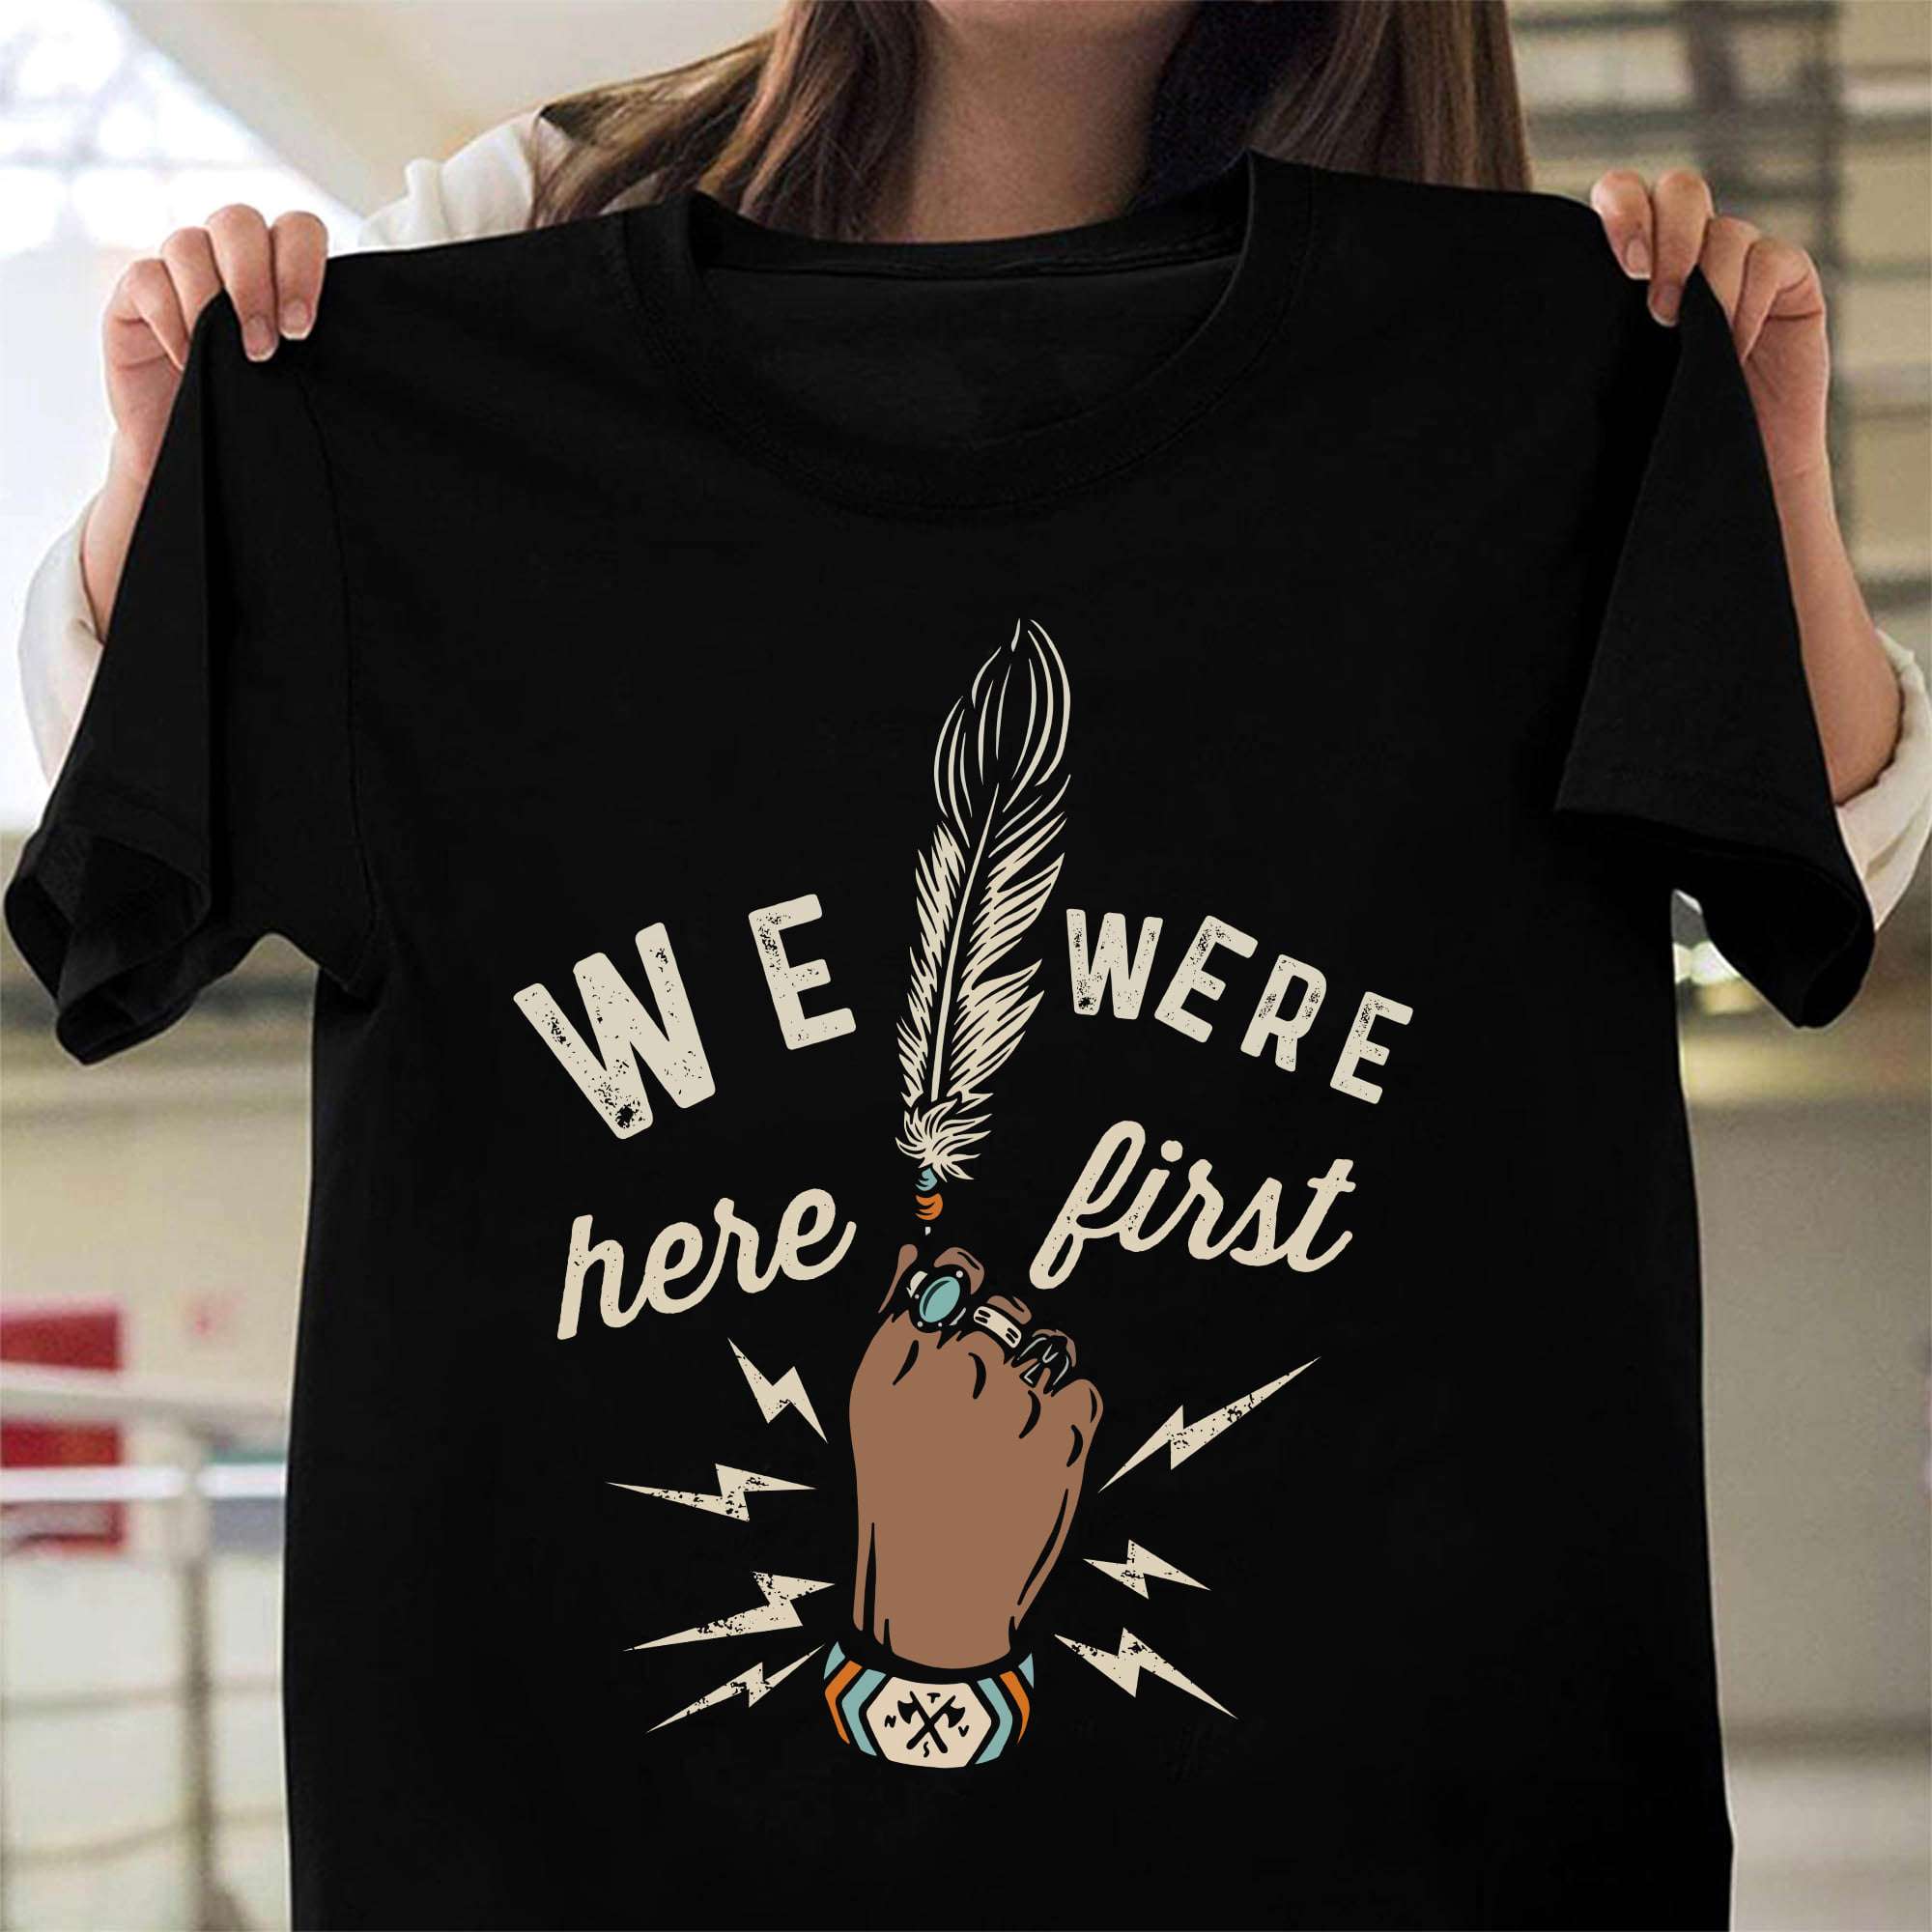 Native Hand, Native Person - We wear here first